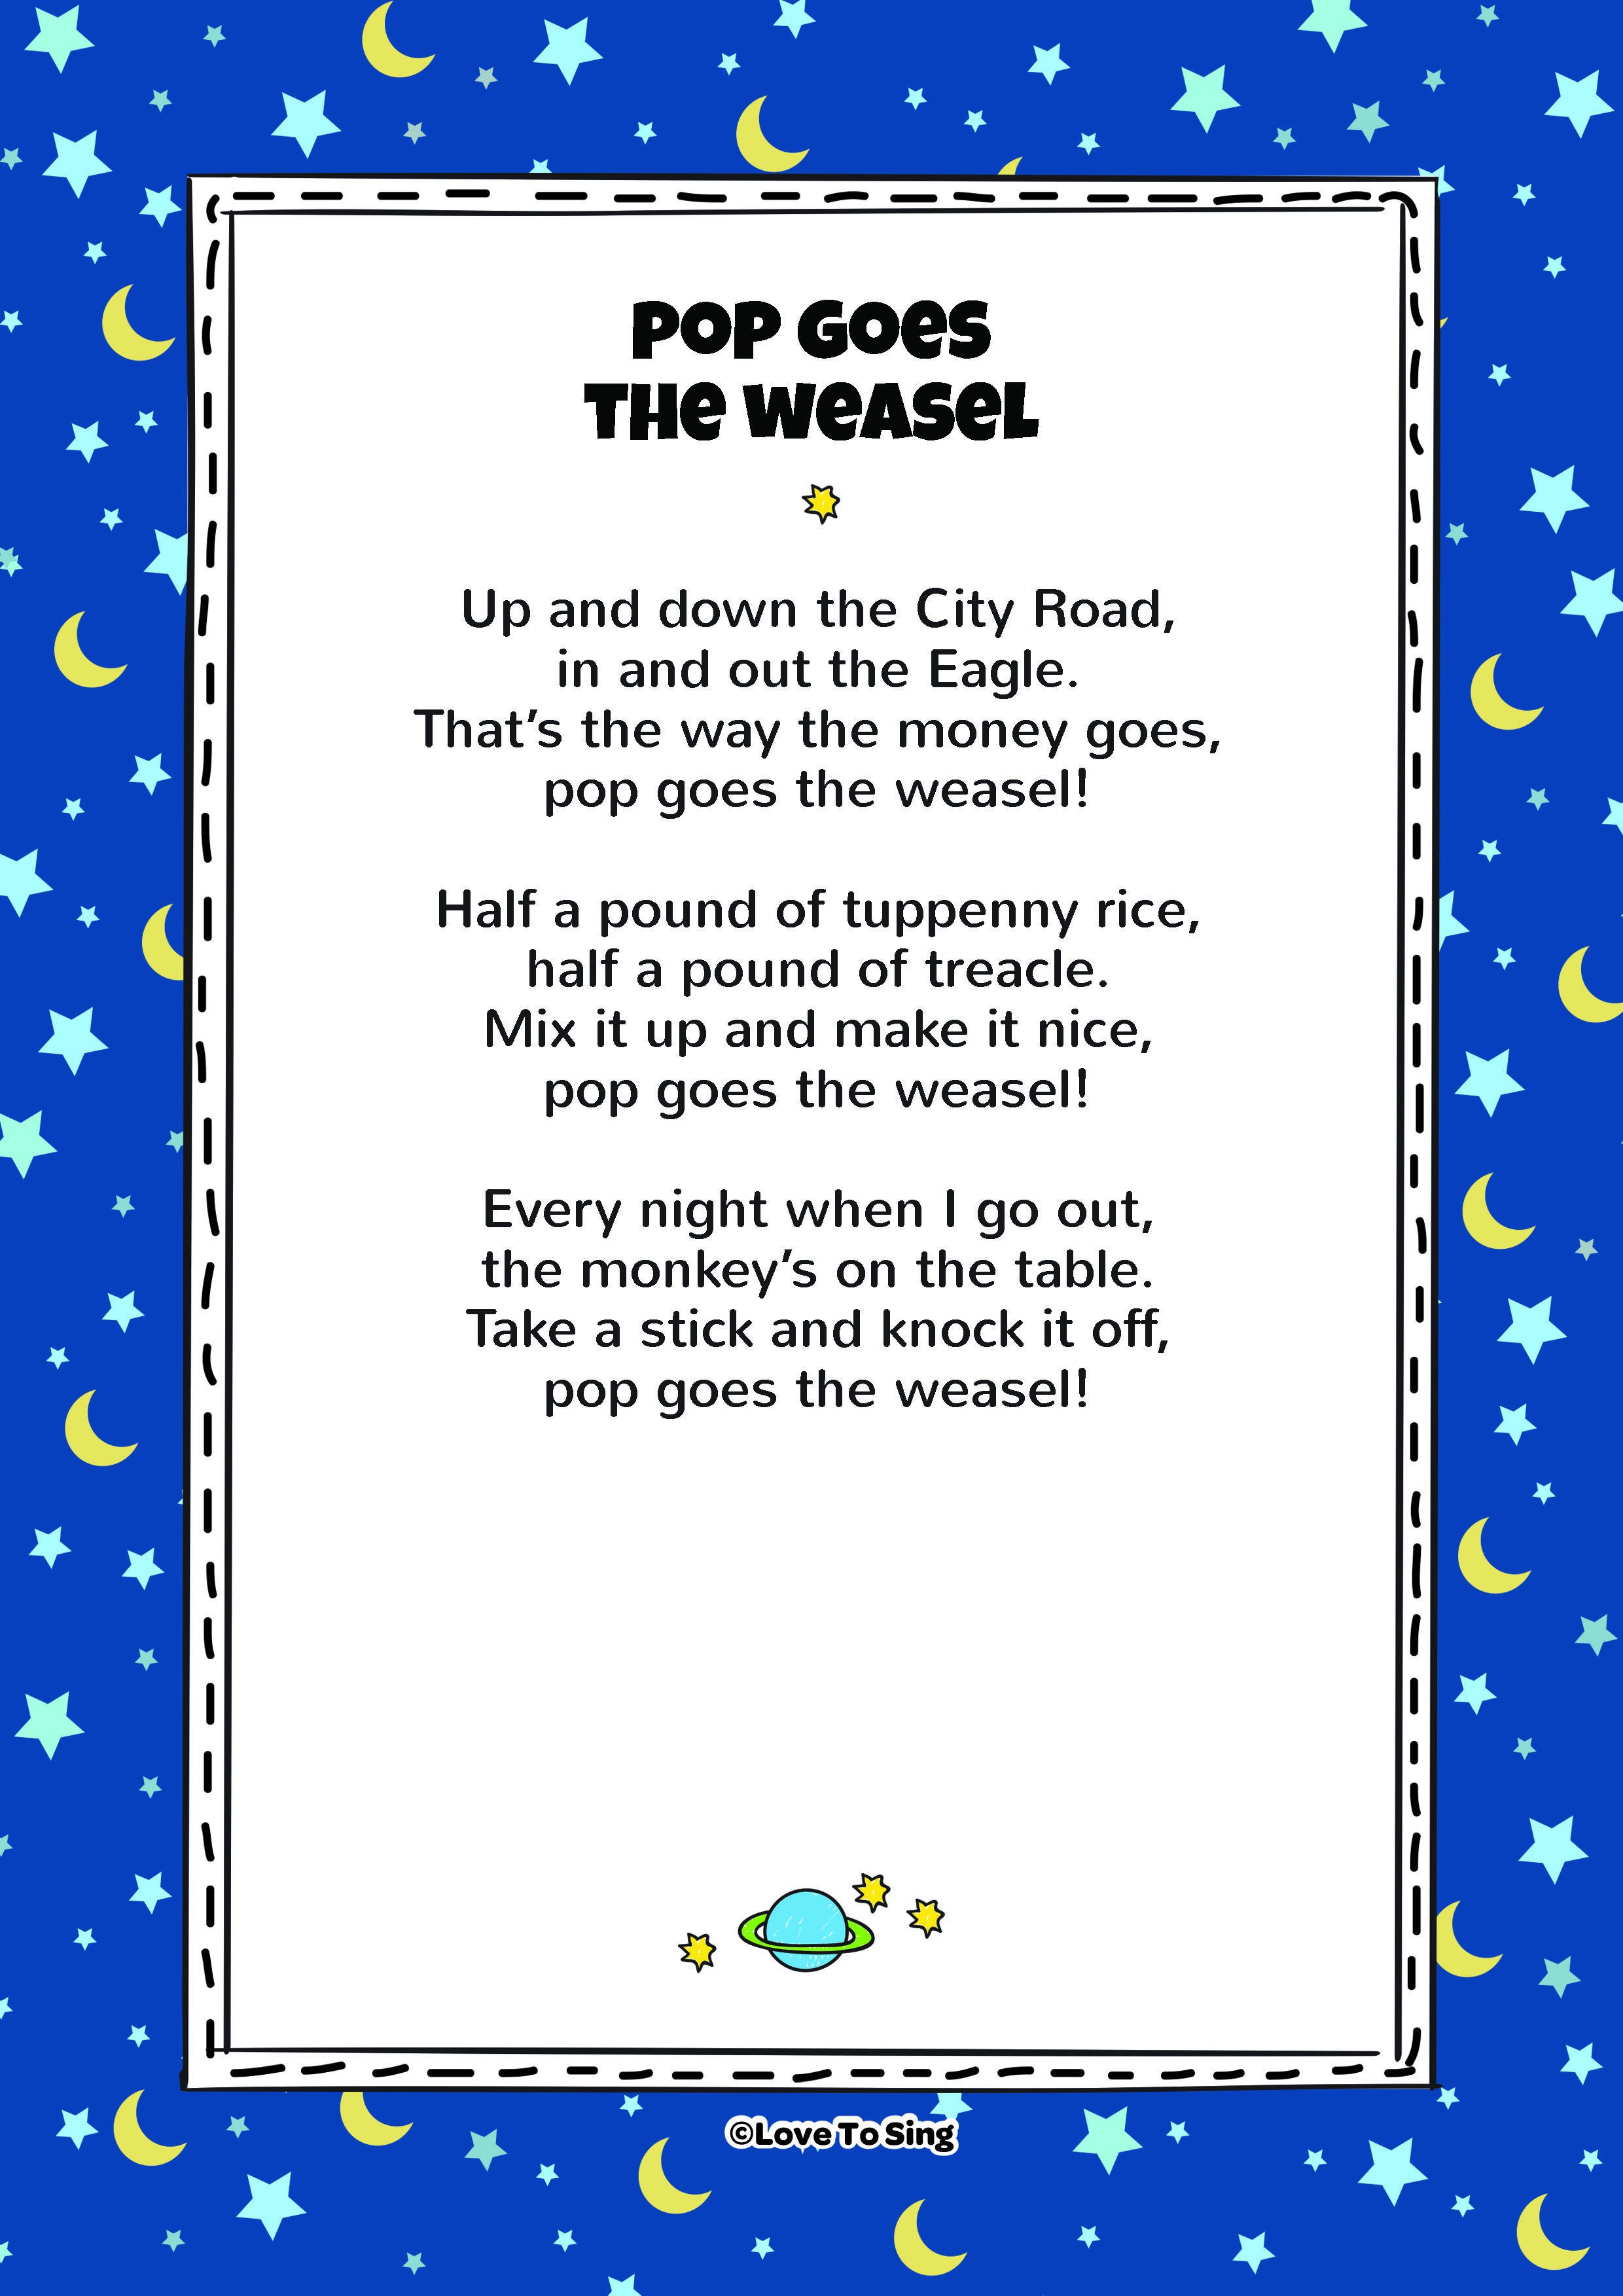 Pop Goes The Weasel   Kids Video Song with FREE Lyrics & Activities